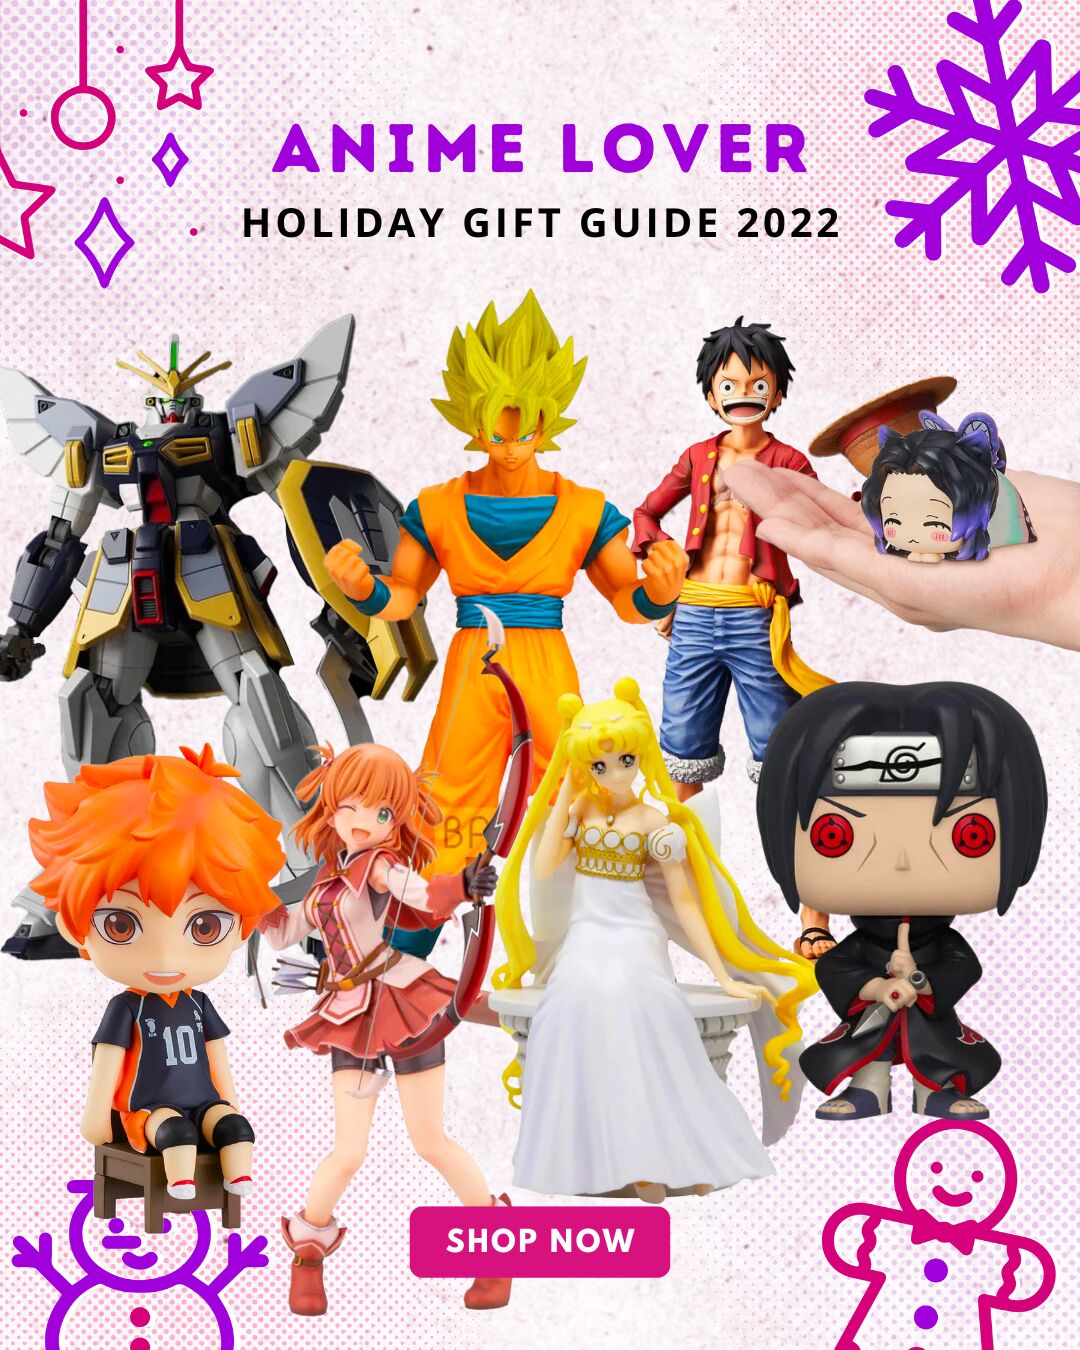 HOLIDAY GIFT GUIDE - Gifts for Anime Fans